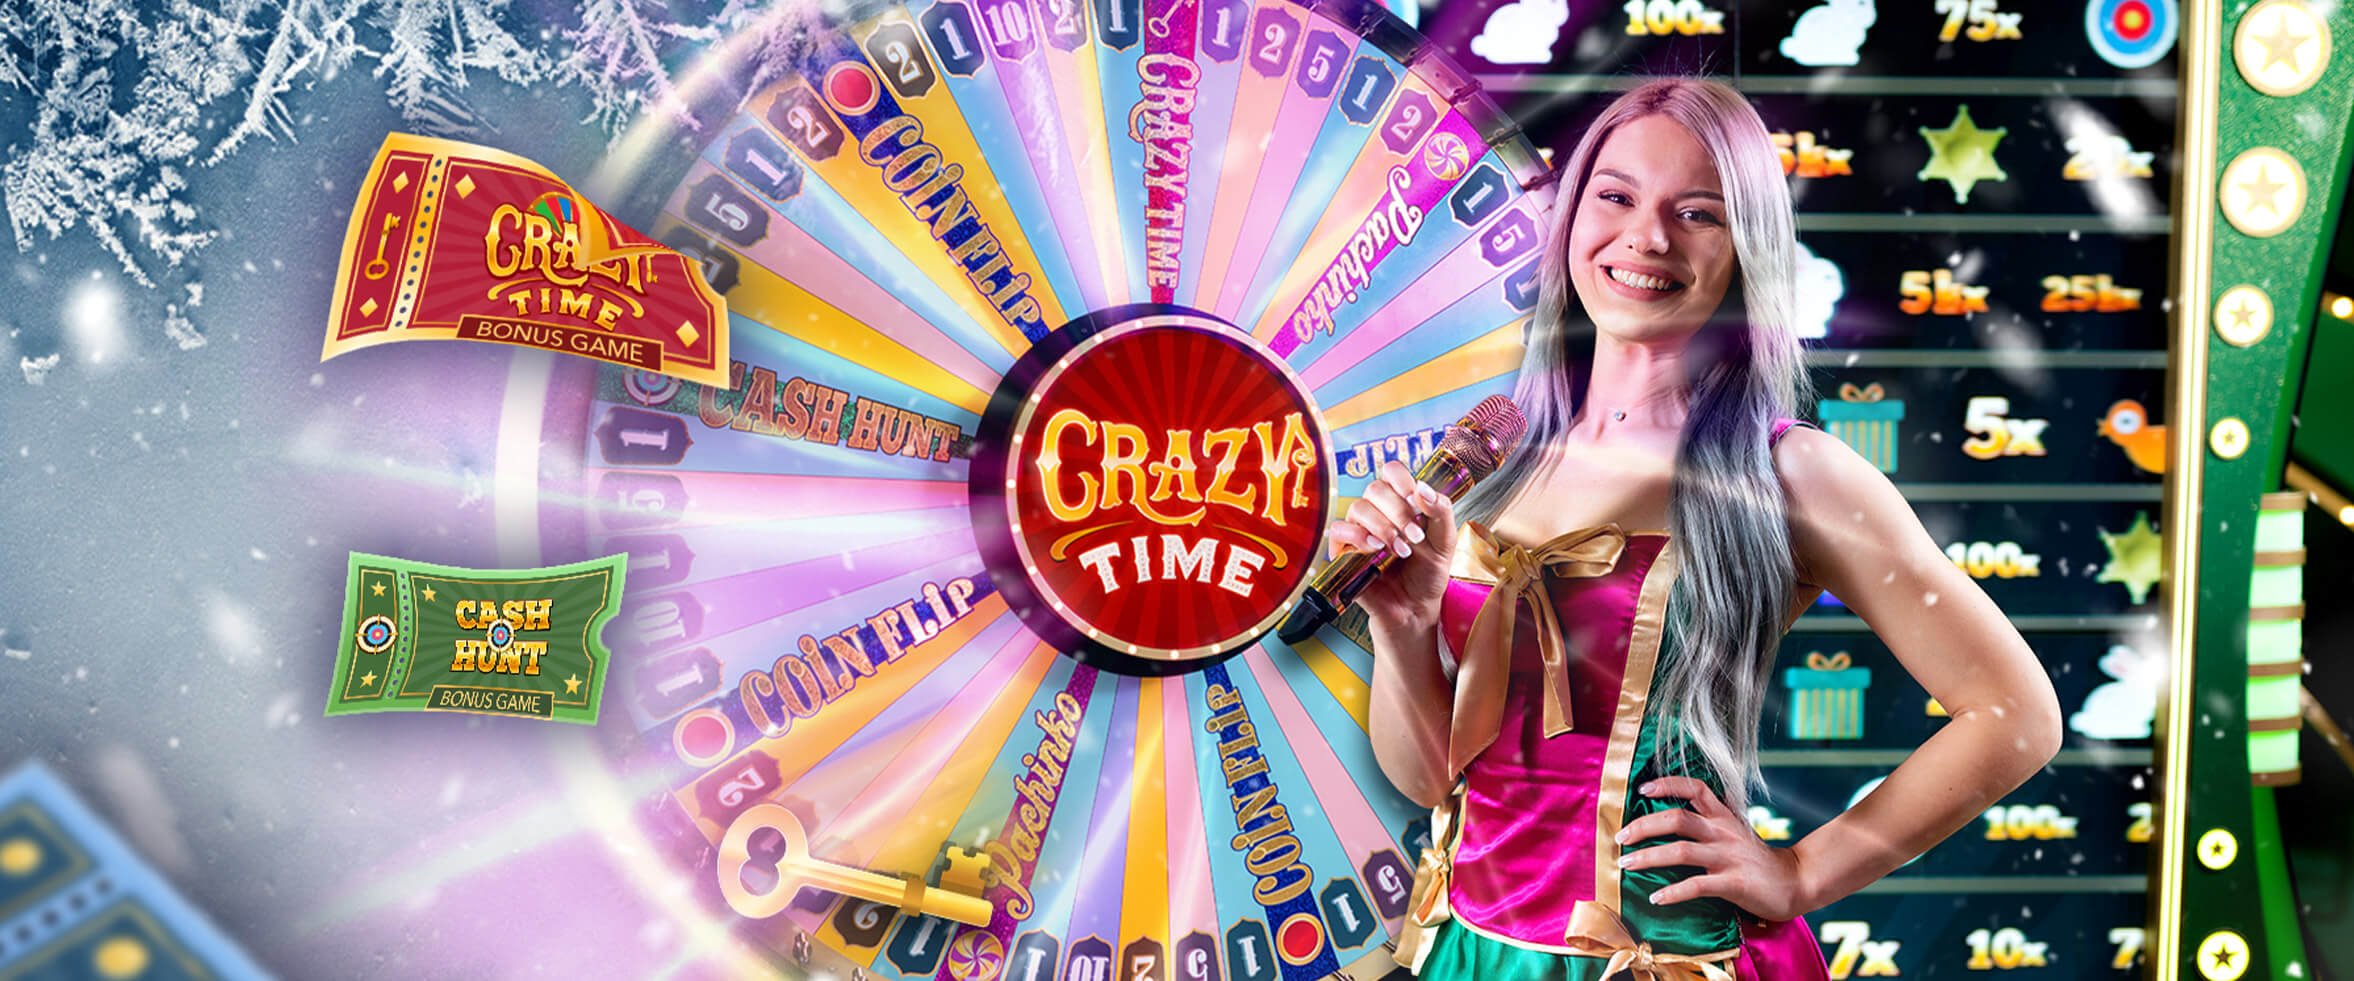 Crazy Time game